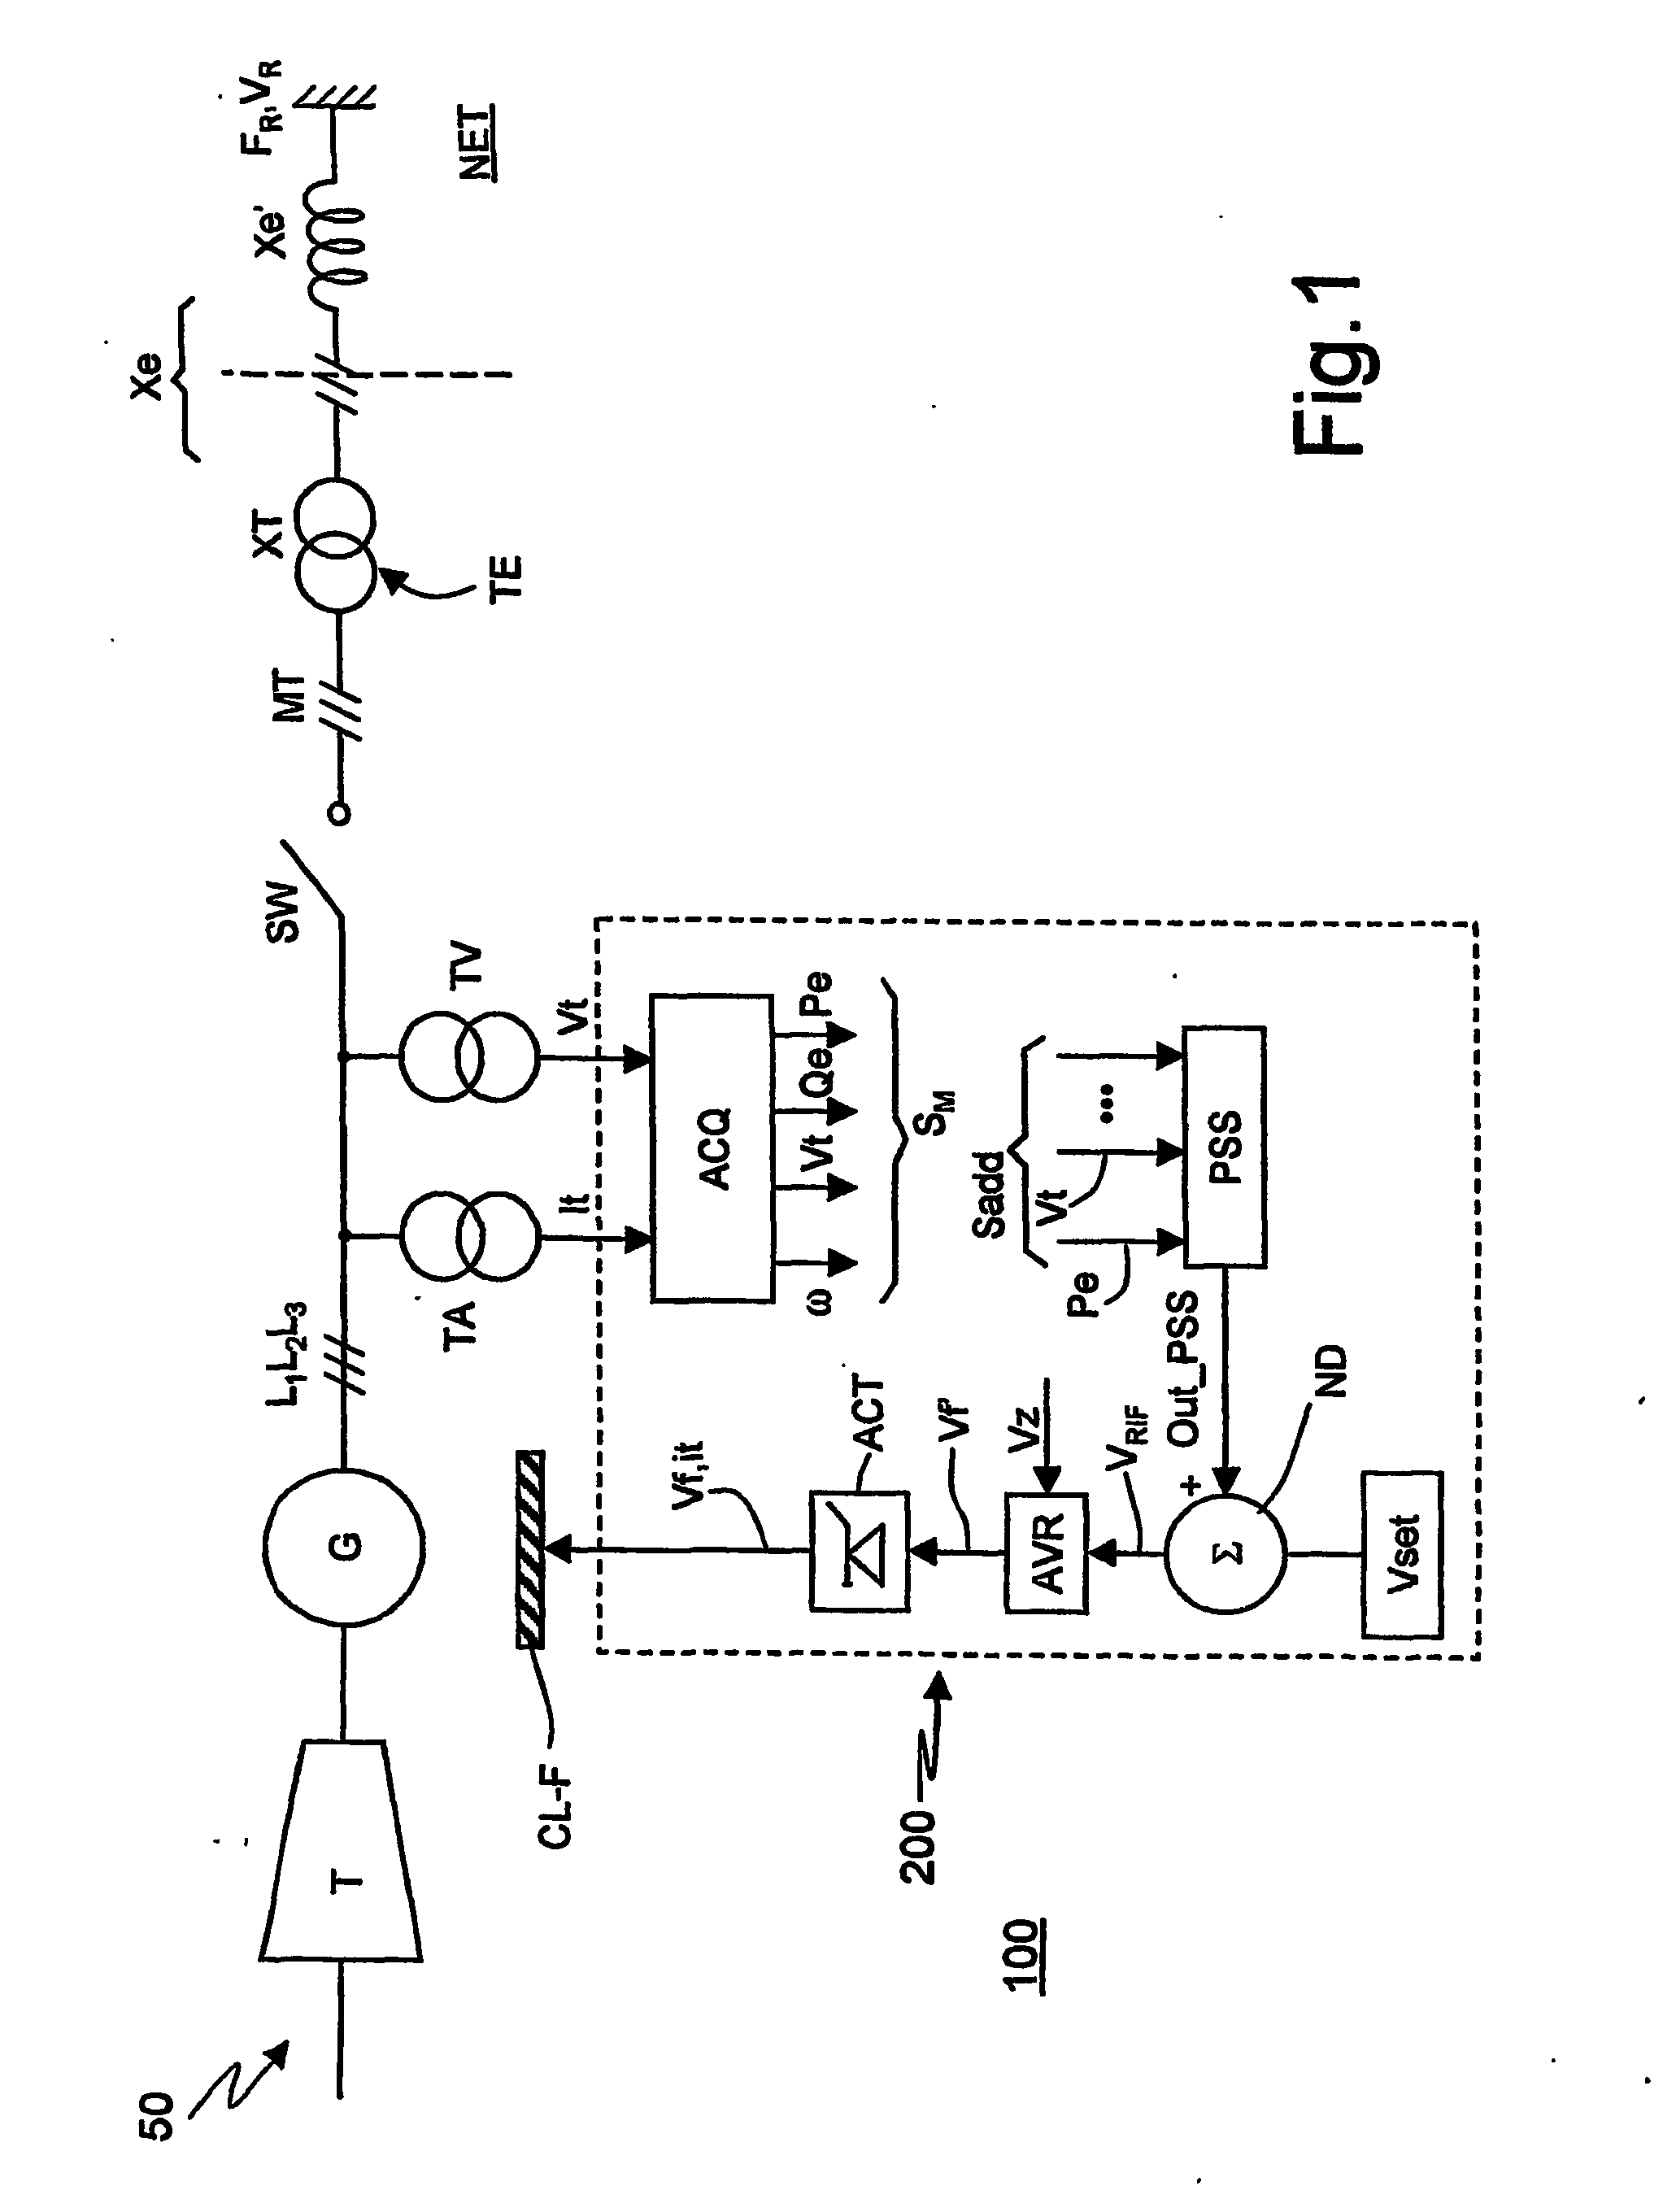 Compensator device for stabilising the power of alternators in electrical power generating plants